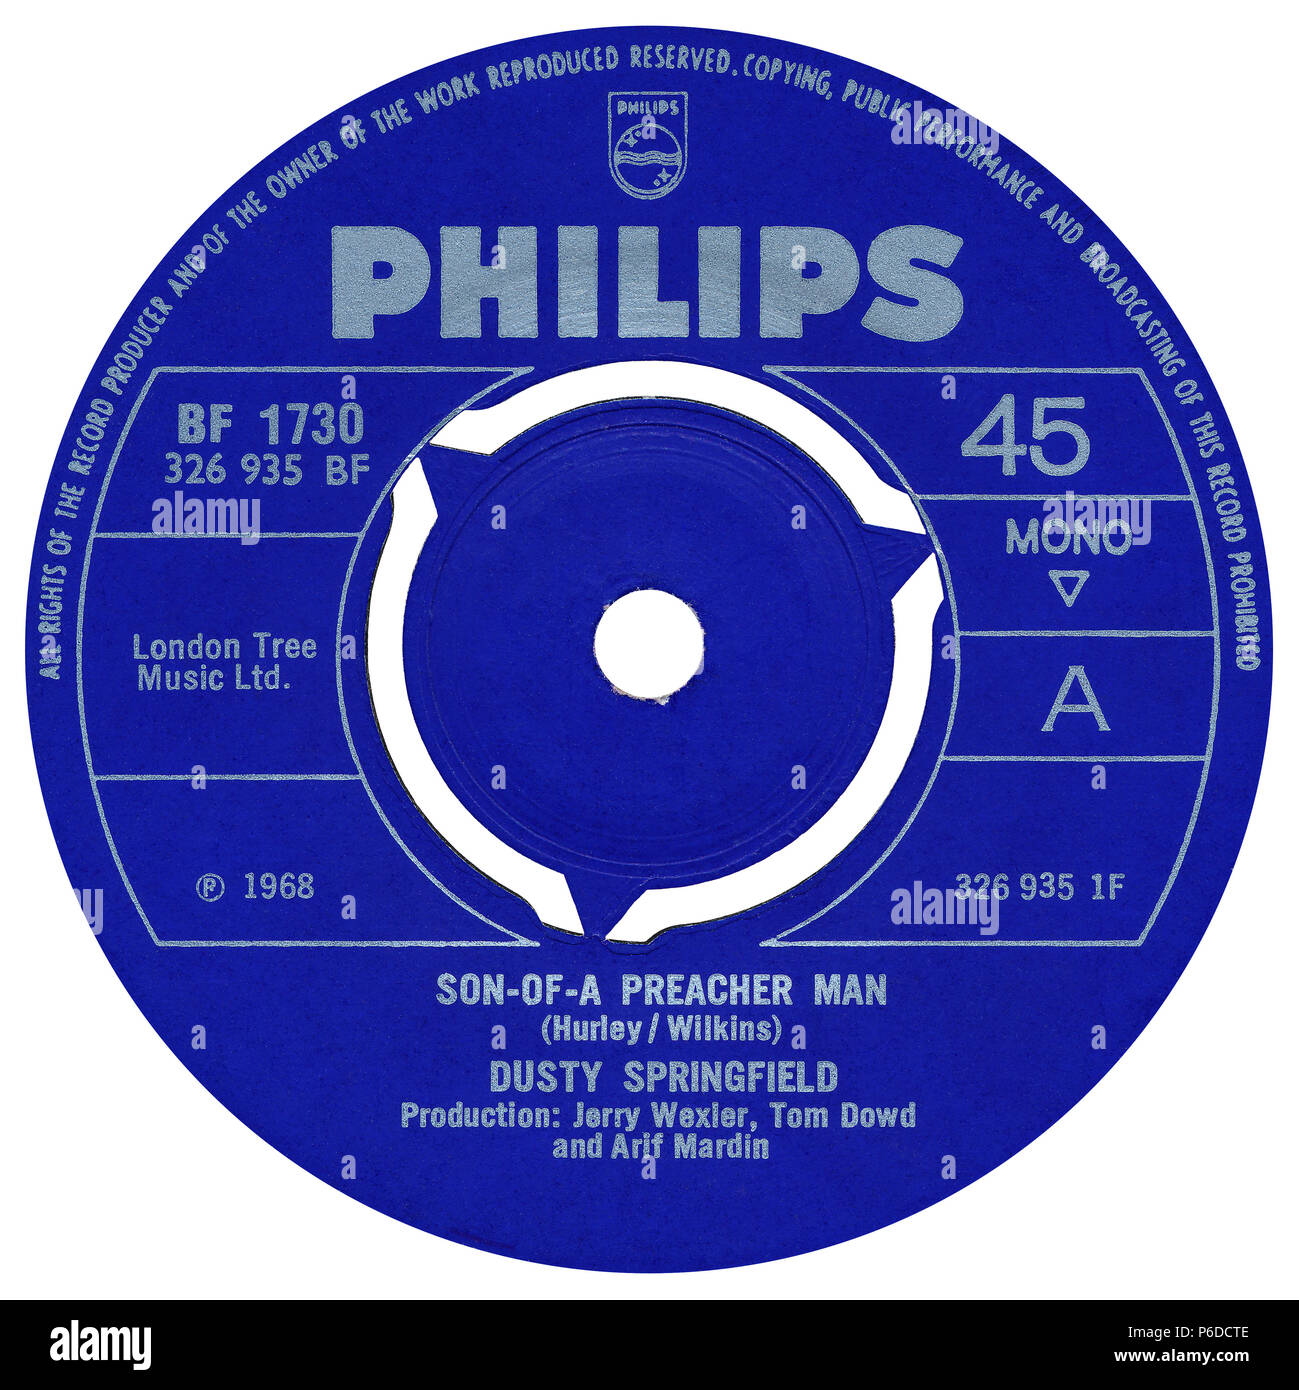 U.K. 45 rpm 7' single of Son Of A Preacher Man by Dusty Springfield on the Philips label from 1968. Written by John Hurley and Ronnie Wilkins and produced by Jerry Wexler, Tom Dowd and Arif Mardin. Stock Photo